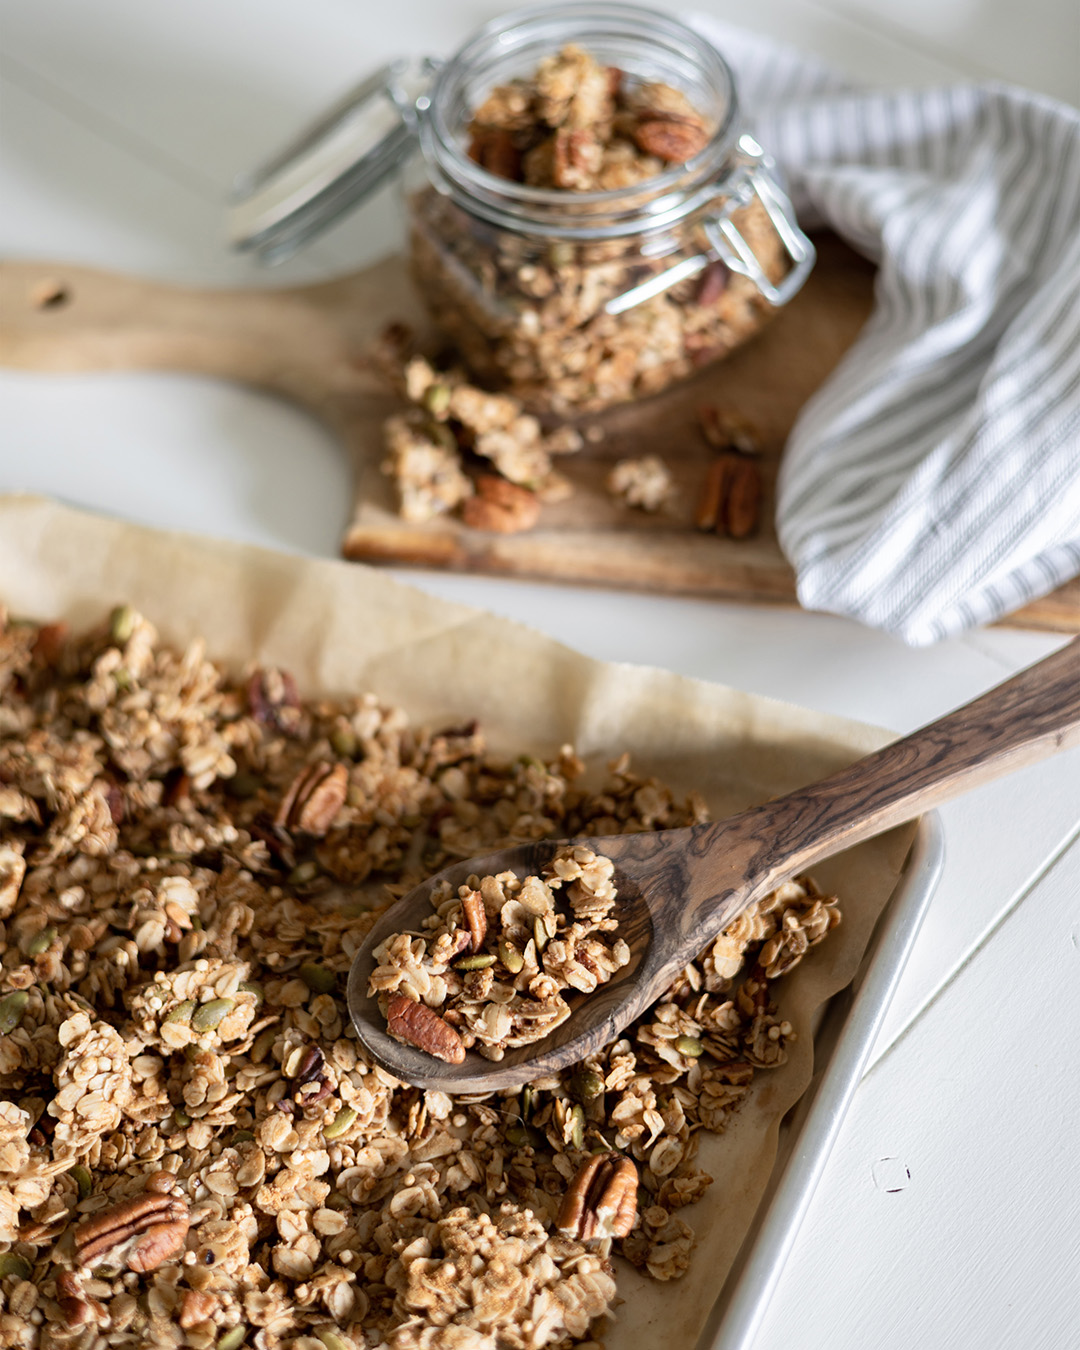 homemade maple pecan granola is great to keep on hand for easy breakfasts, delicious snacking, or fancy yogurt parfaits if you're entertaining for Sunday brunch. It can be made ahead and stored in the freezer so it's always ready.